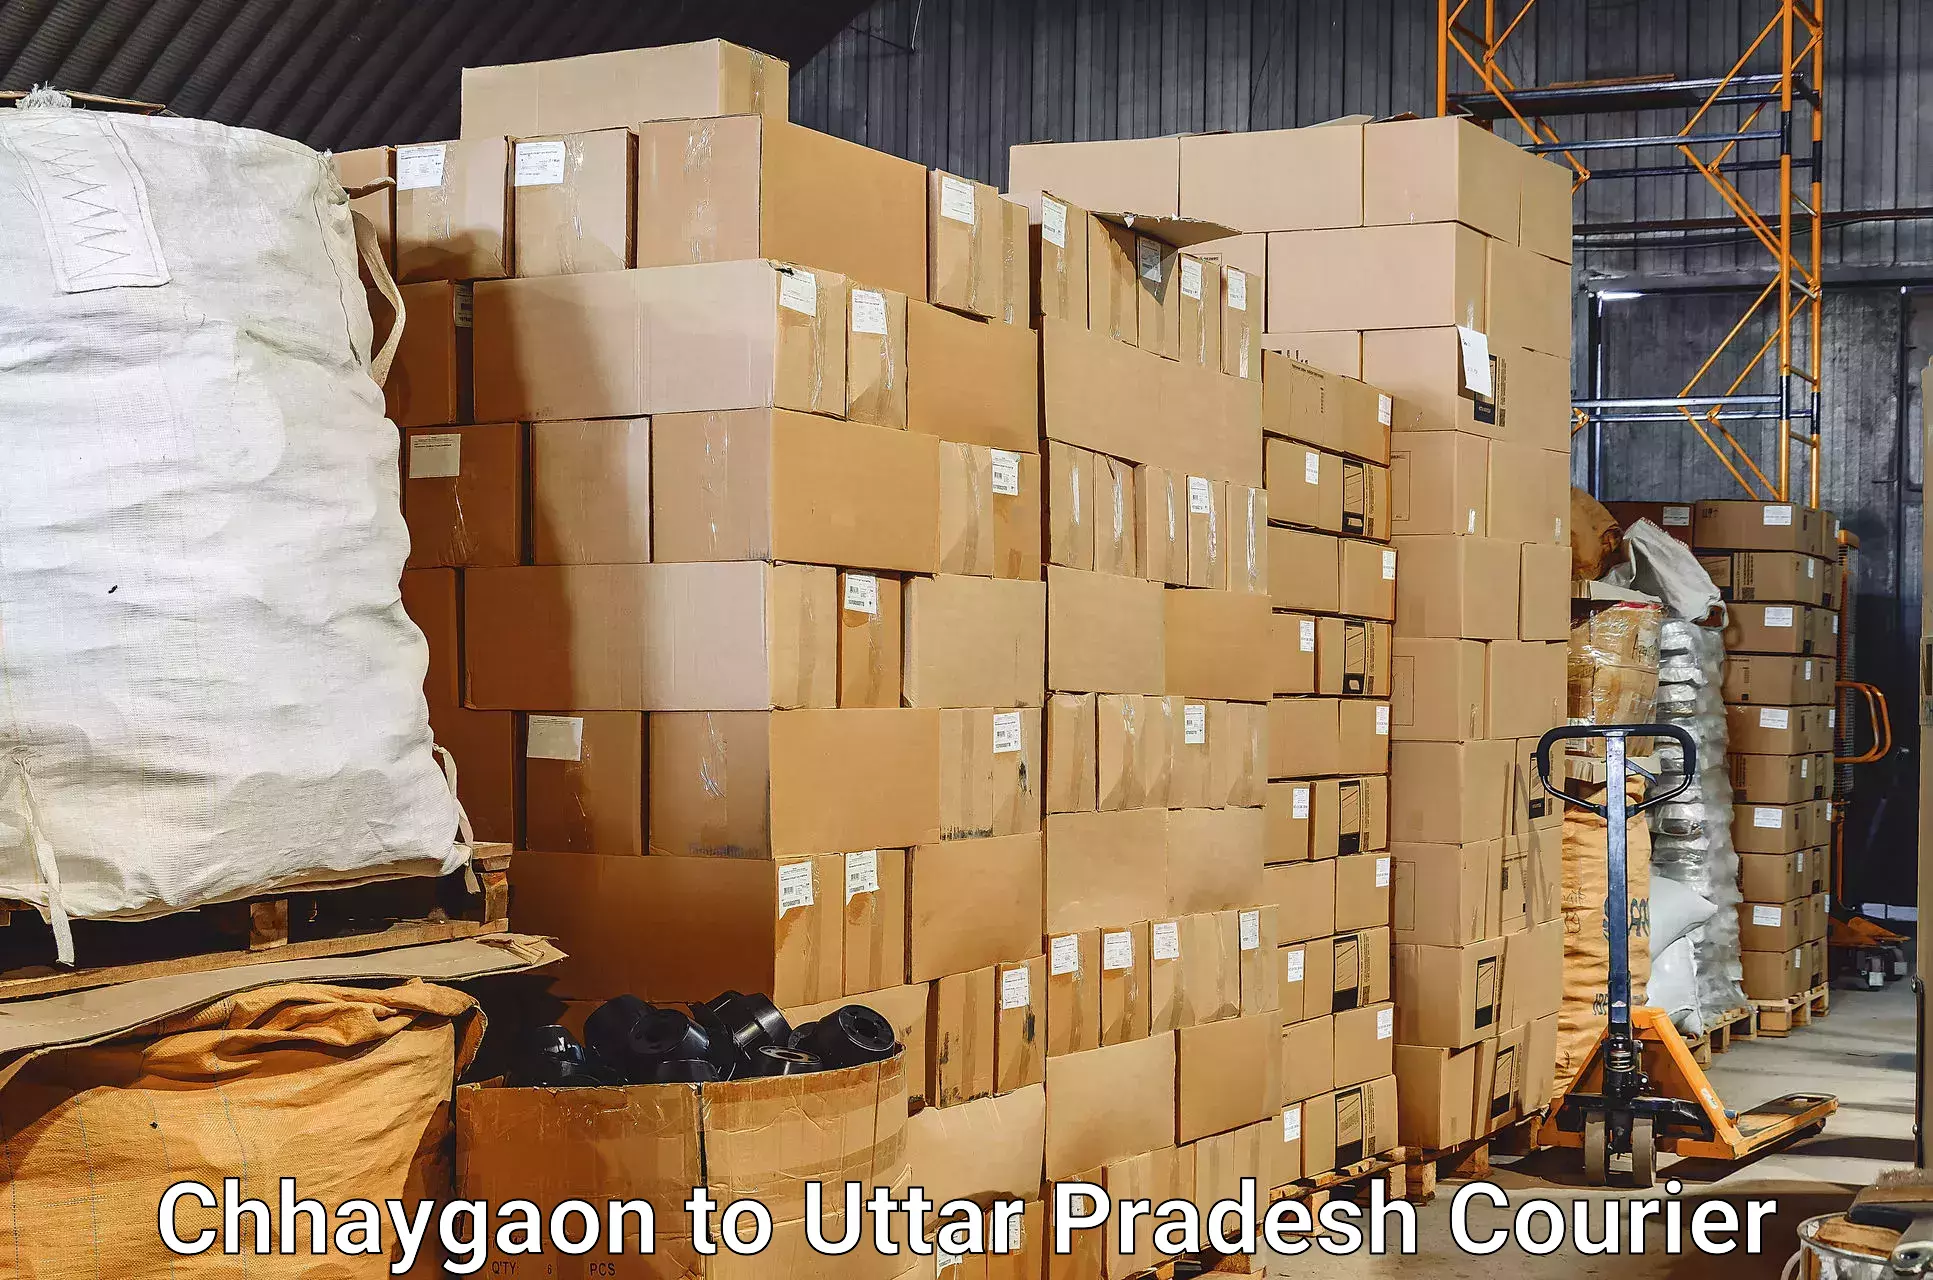 Baggage transport professionals Chhaygaon to Fatehabad Agra